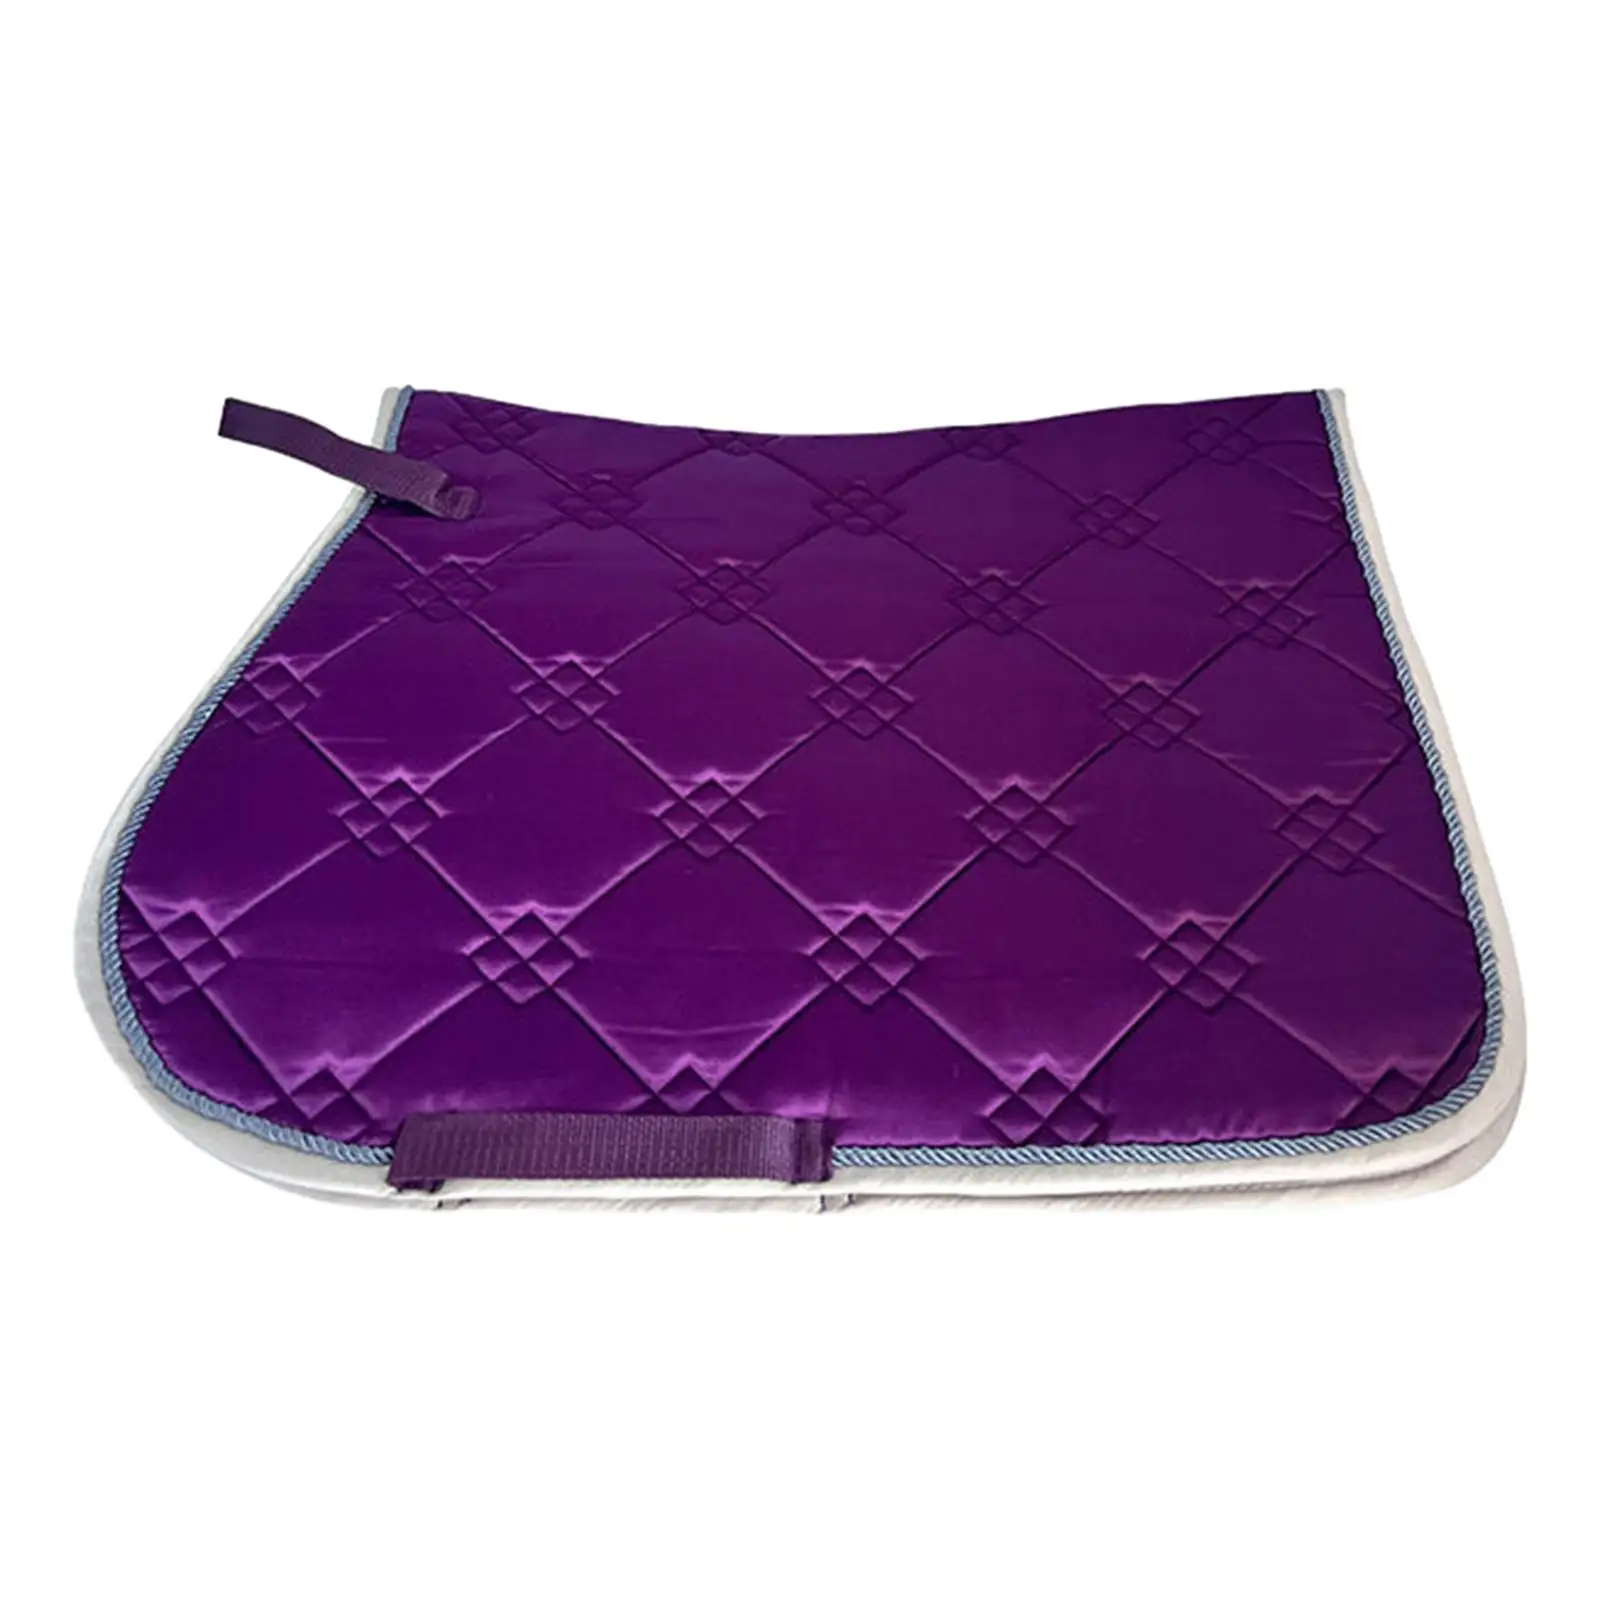 Saddle Pad for Horse Nonslip Soft Protective Thickening Padding Shock Absorbing Sports Equestrian Jumping Dressage Pad